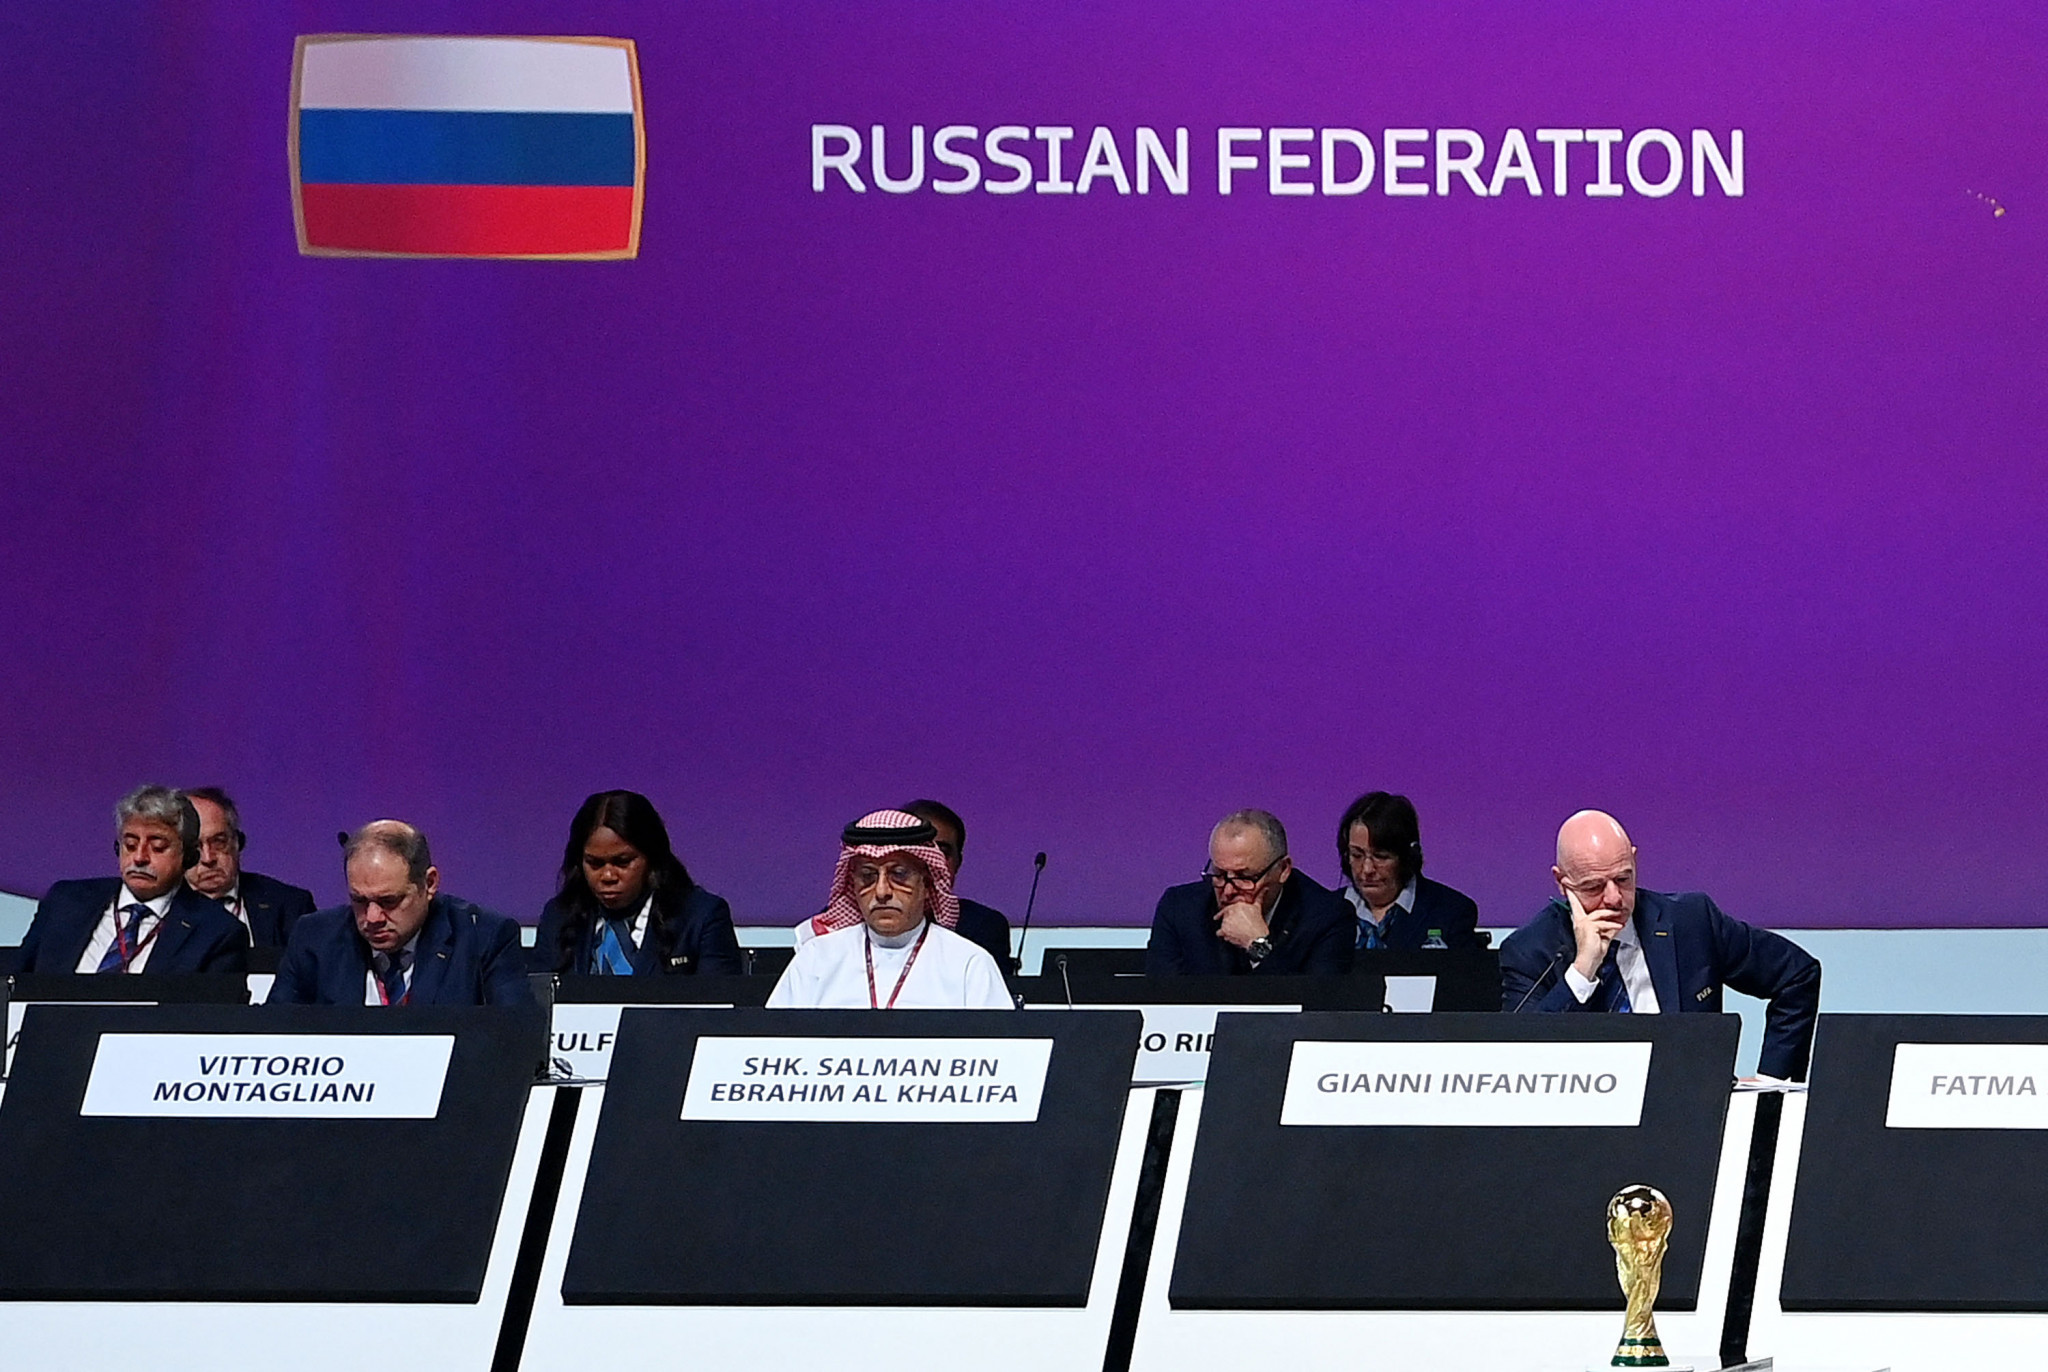 Russia's national teams have been banned from all FIFA competitions and expelled from men's World Cup qualifying, but the Russian Football Union remains an active member of the International Federation ©Getty Images